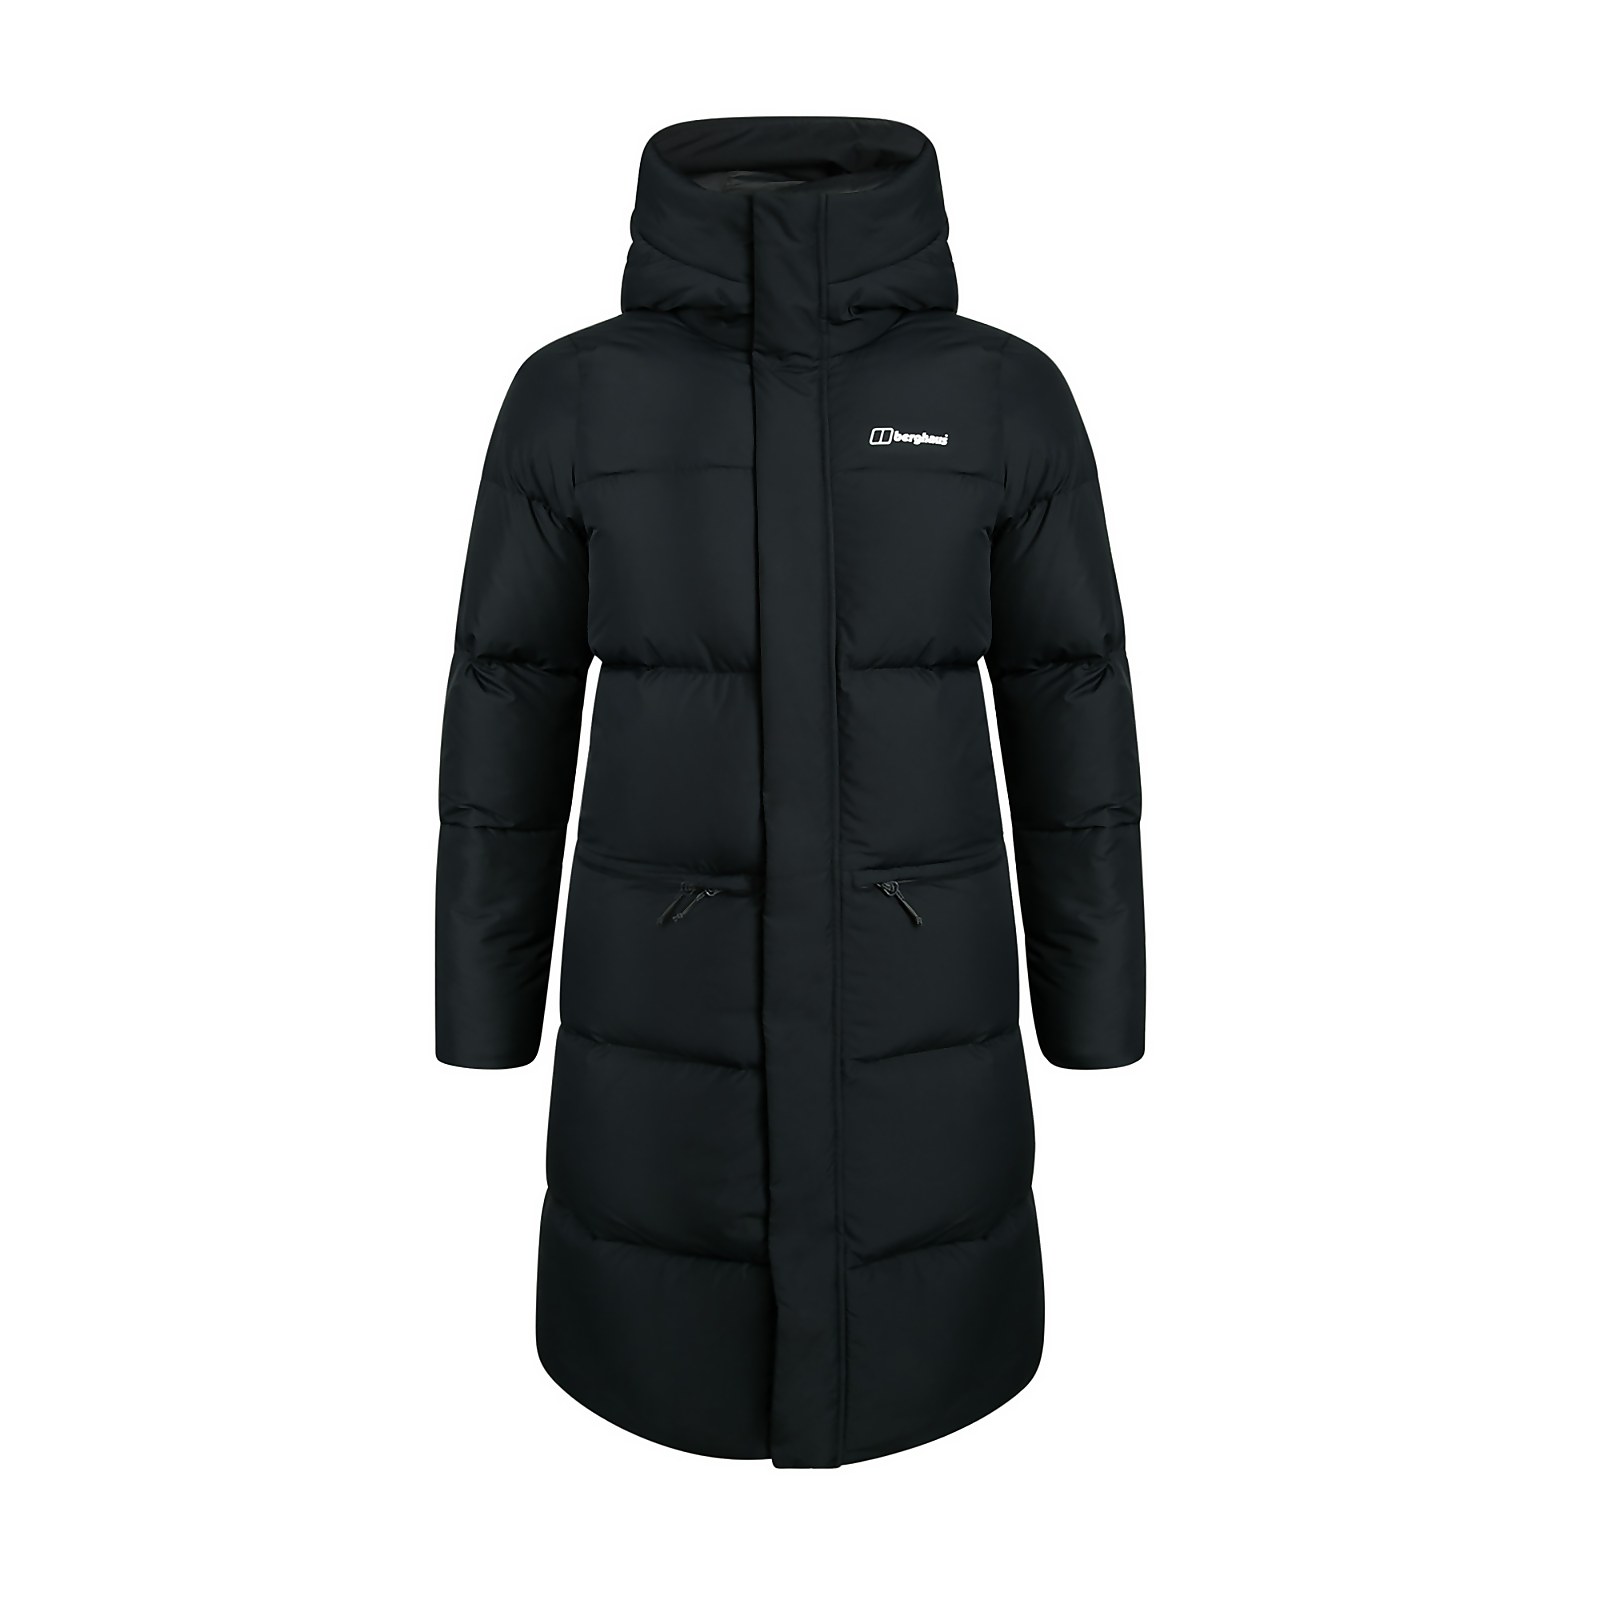 Berghaus Womens Combust Reflect Long Down Insulated Jacket - Black - 20